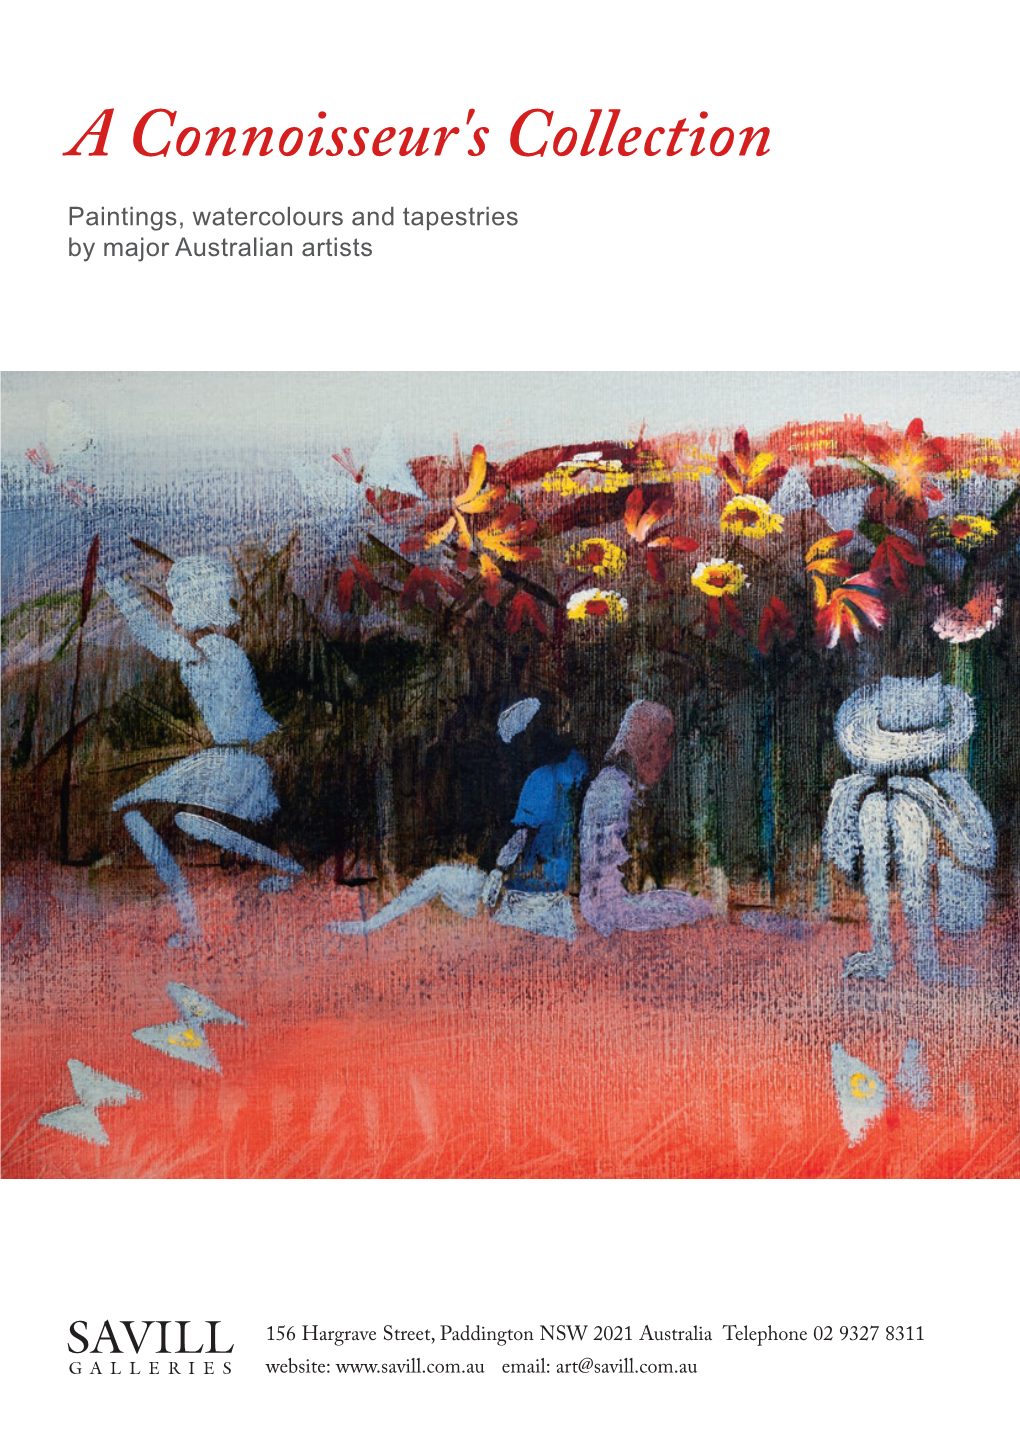 A Connoisseur's Collection Paintings, Watercolours and Tapestries by Major Australian Artists